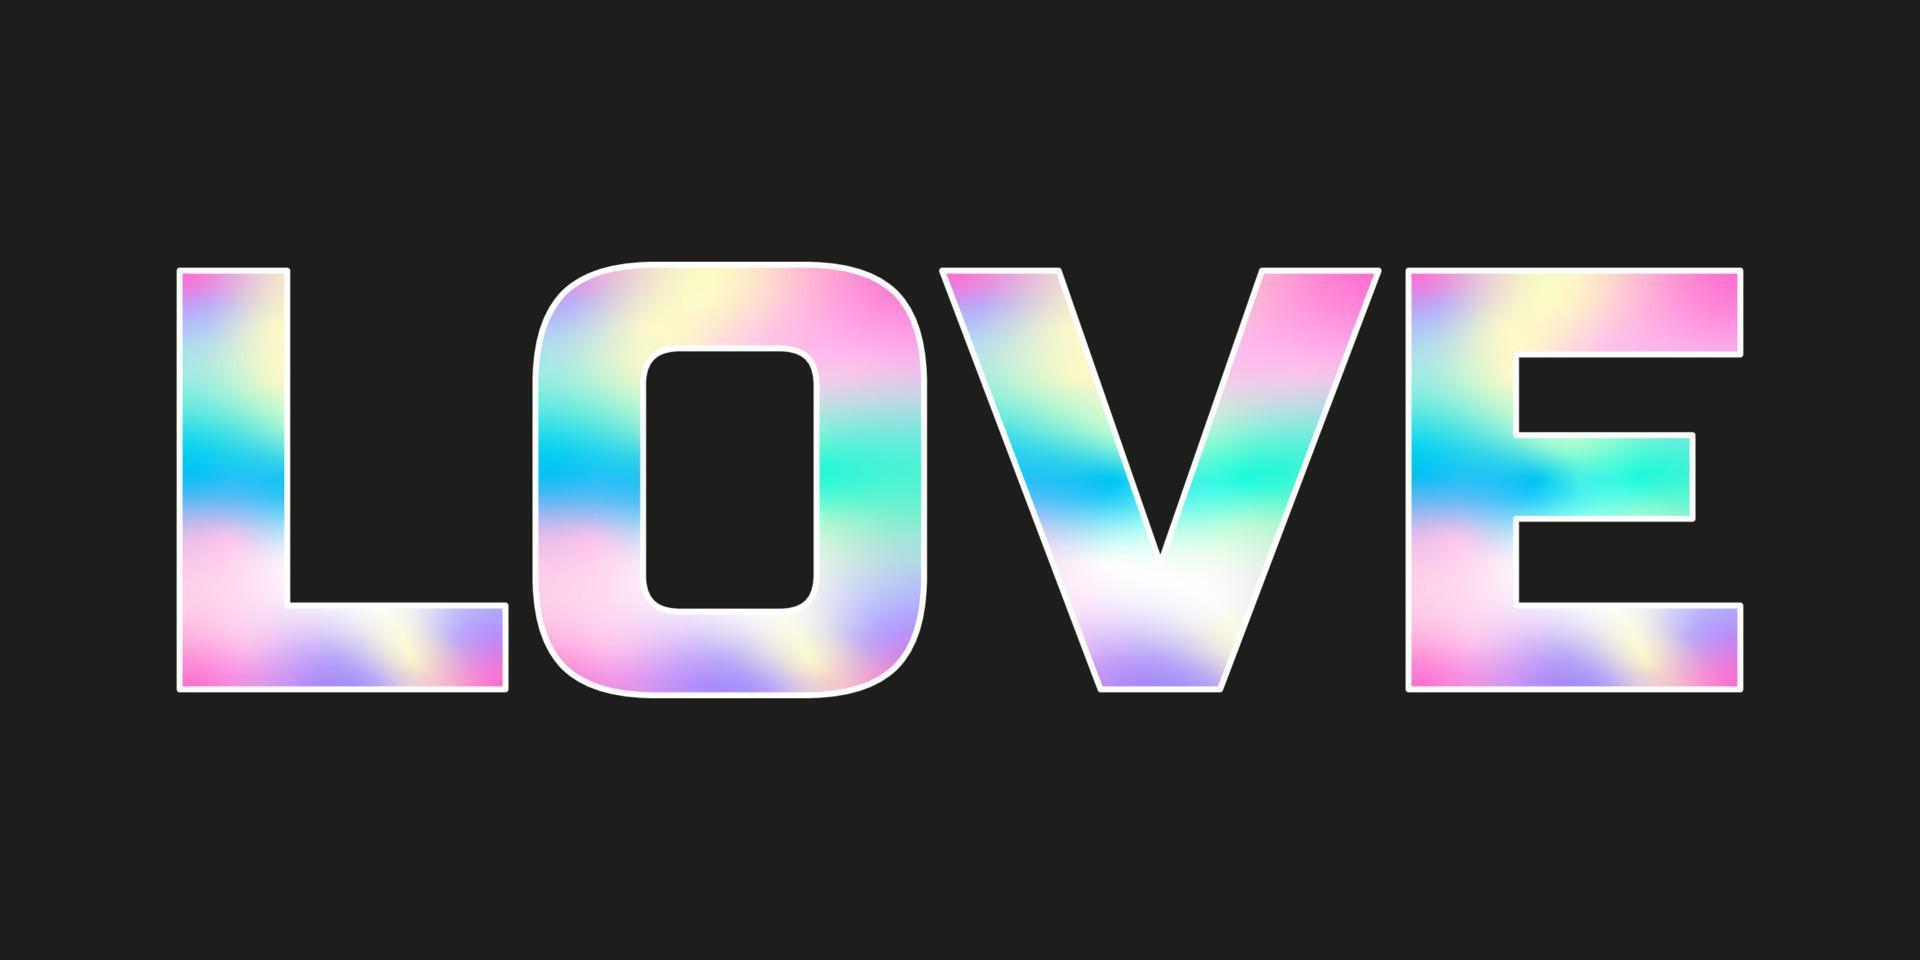 Holographic Love sticker for Valentines day. Hologram label of different shapes. Vector sticker for design mockups. Holographic textured sticker for preview tags, labels